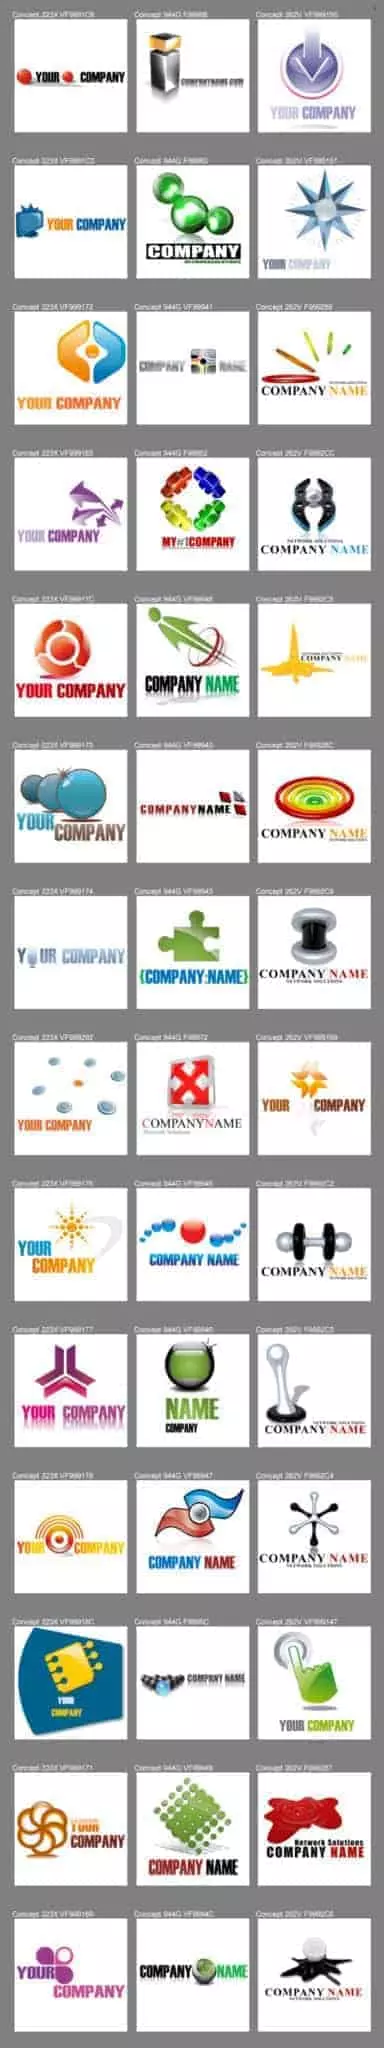 our experts show examples of a great brand logo 6